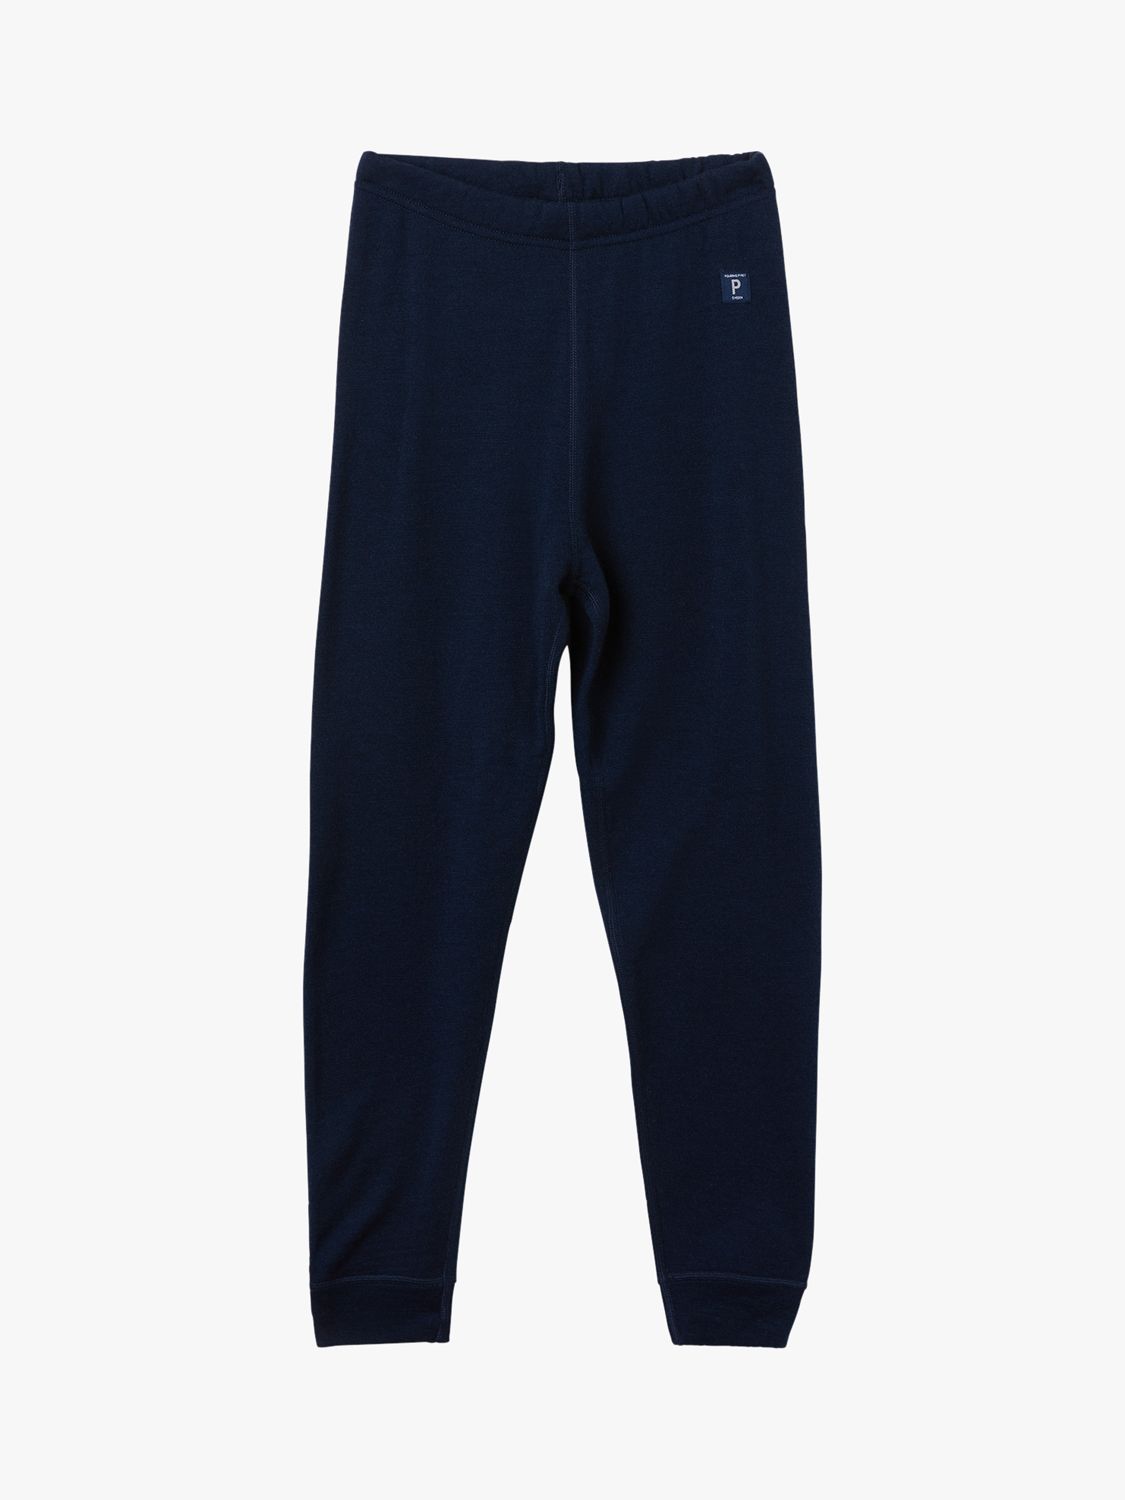 Buy Polarn O. Pyret Baby Wool Thermal Trousers Online at johnlewis.com